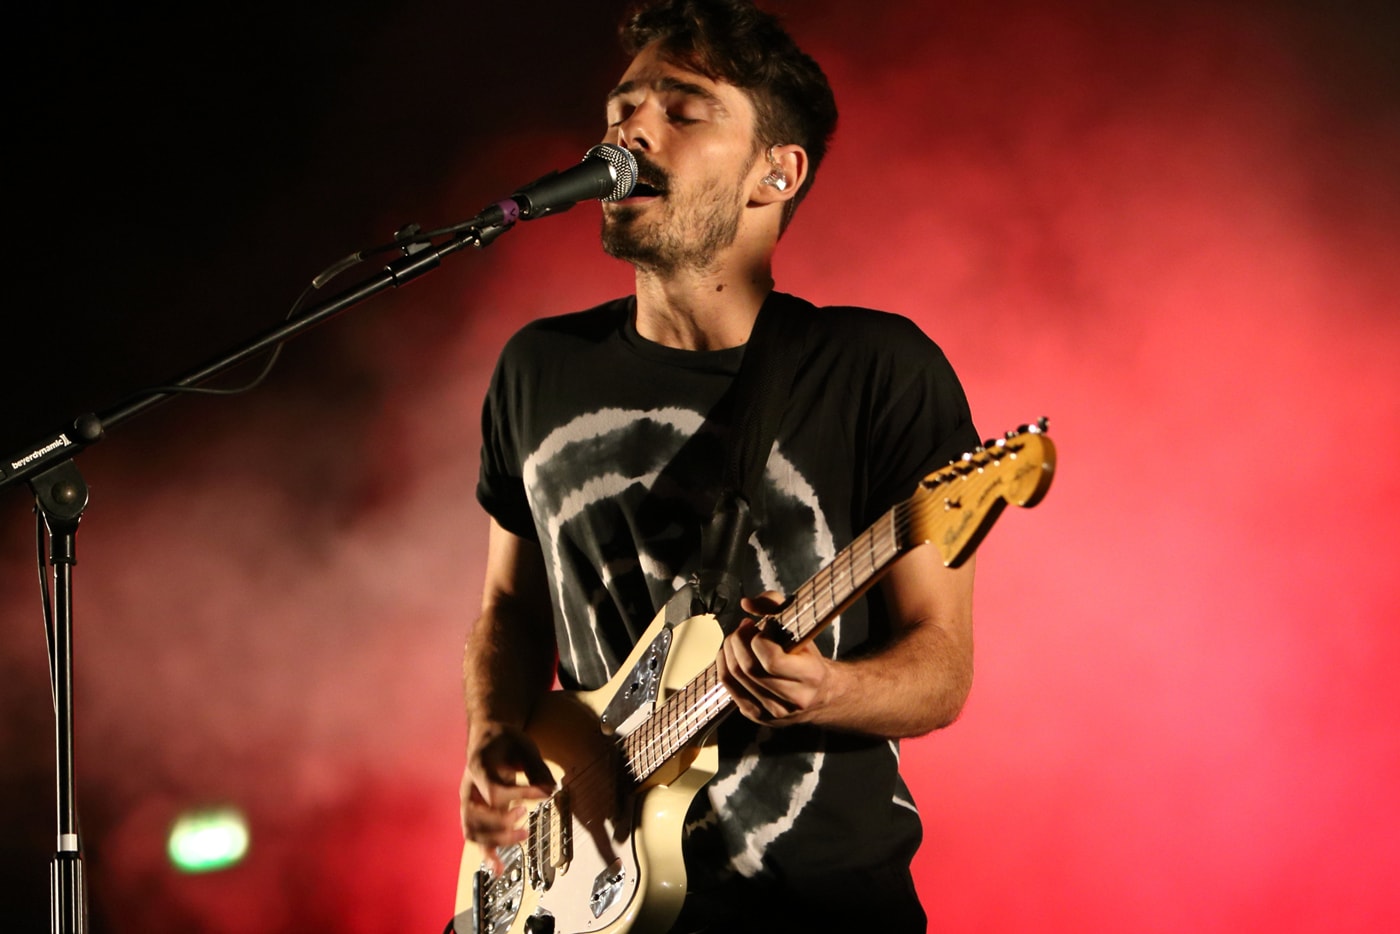 local-natives-who-knows-who-cares